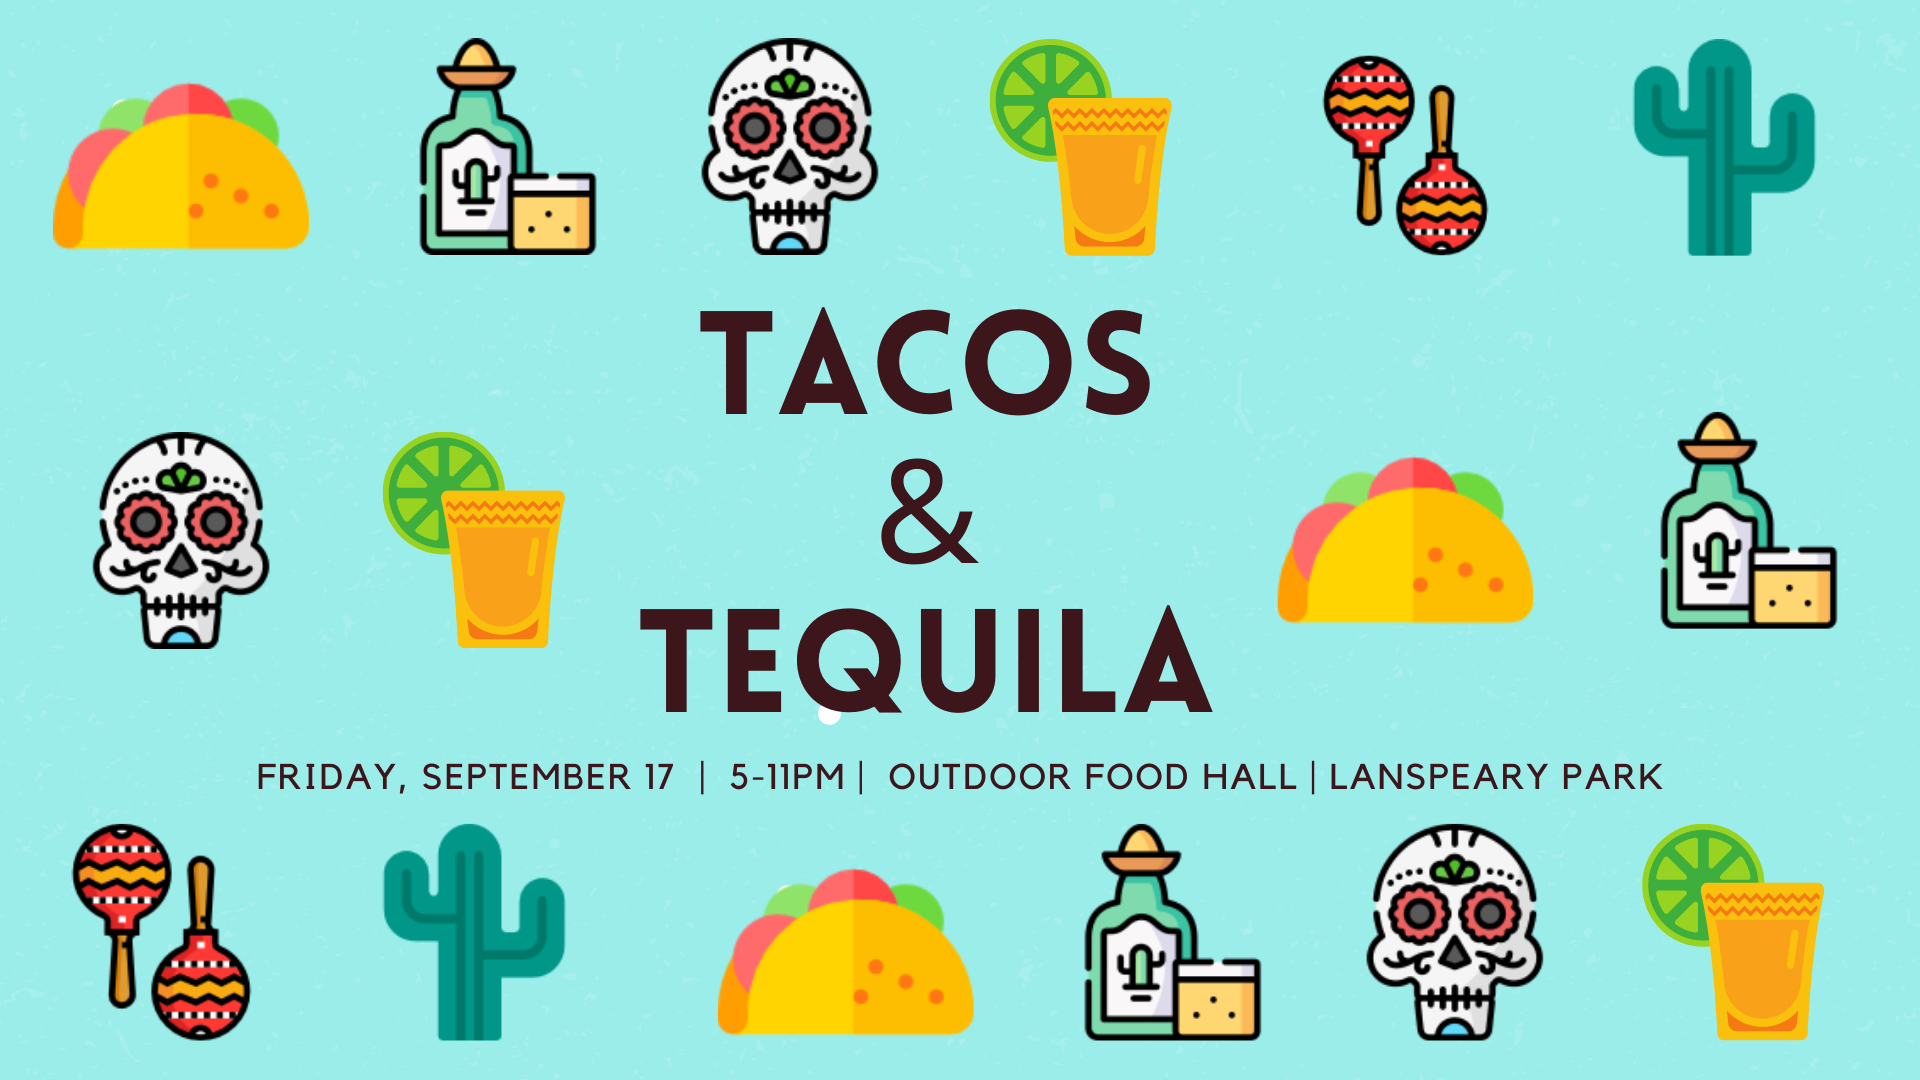 6 Tips For Tacos & Tequila Night at the Outdoor Food Hall This Weekend